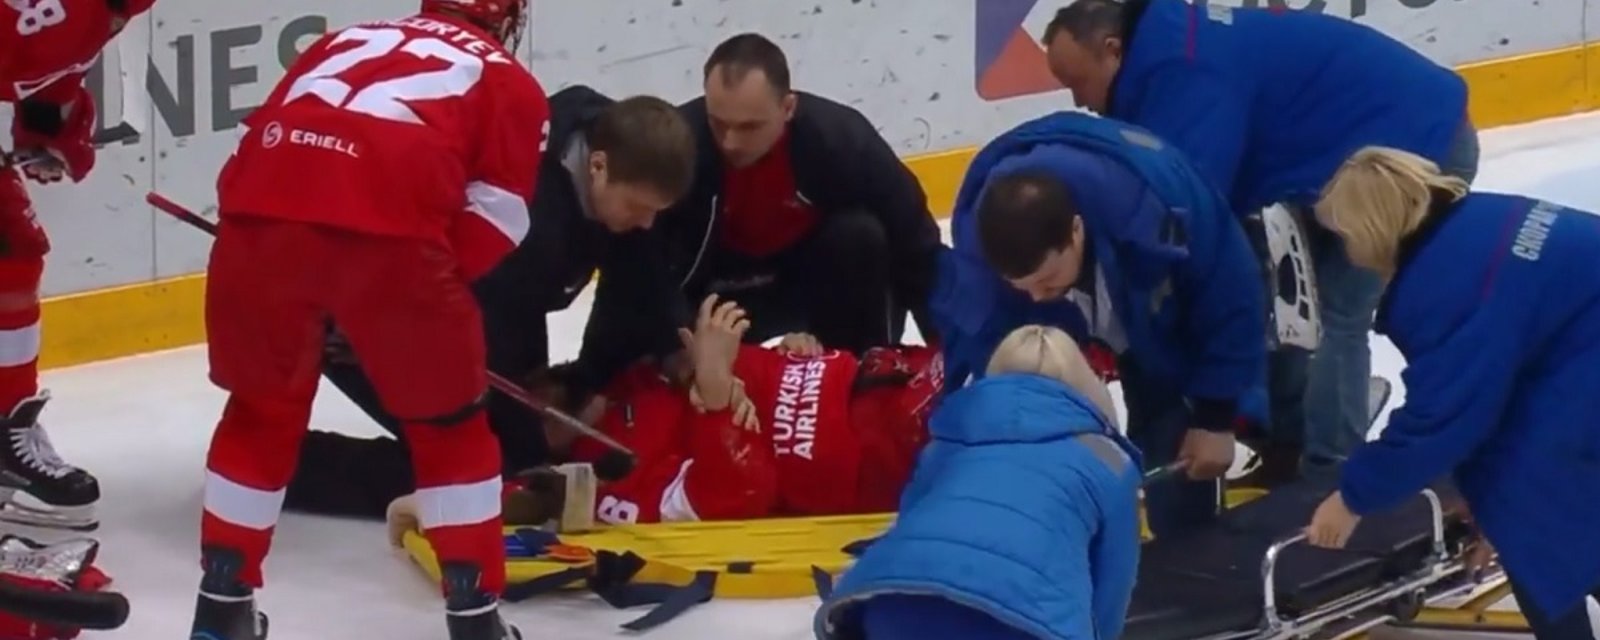 Former NHLer leaves on a stretcher after goalie sends him head first into the boards.